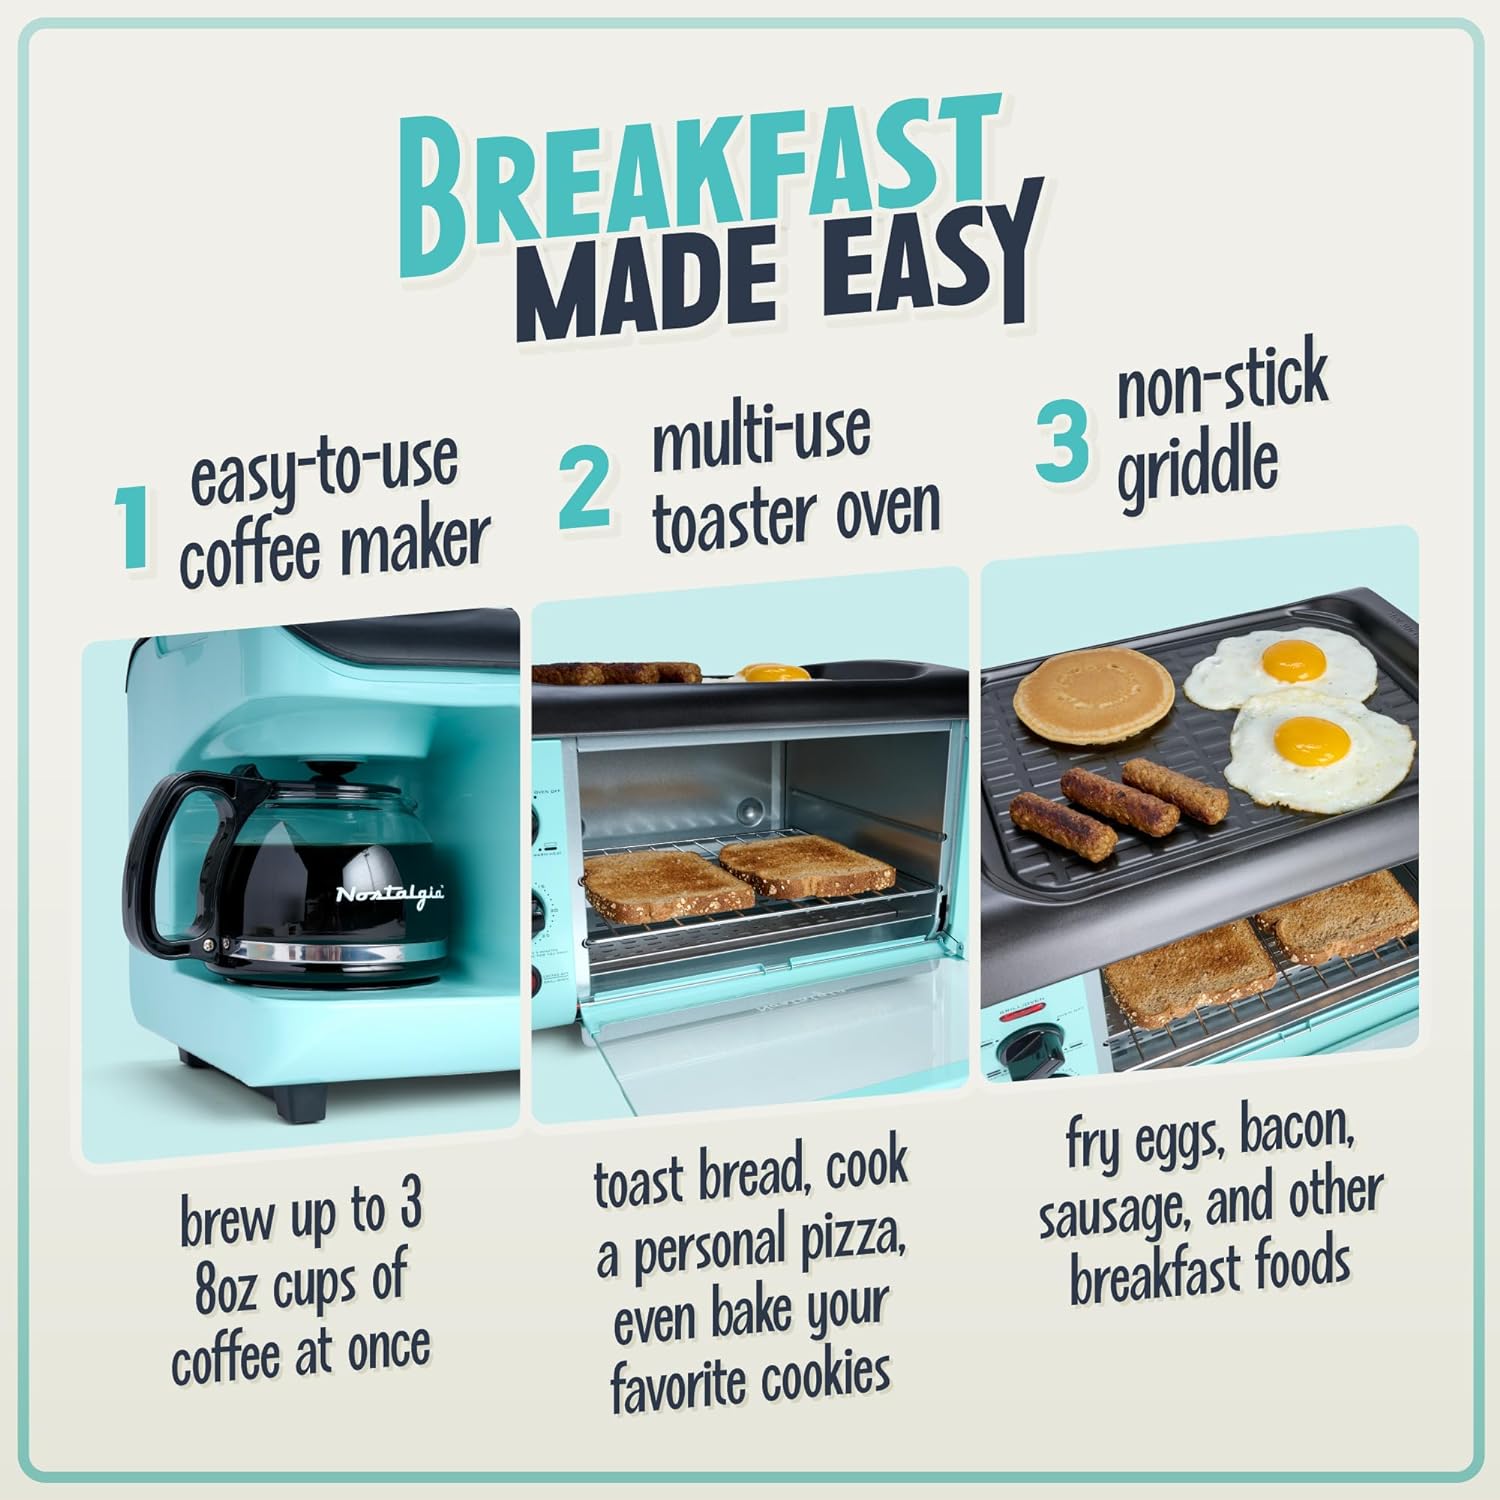 3-In-1 Breakfast Station - Includes Coffee Maker, Non-Stick Griddle, and 4-Slice Toaster Oven - Versatile Breakfast Maker with Timer - Aqua